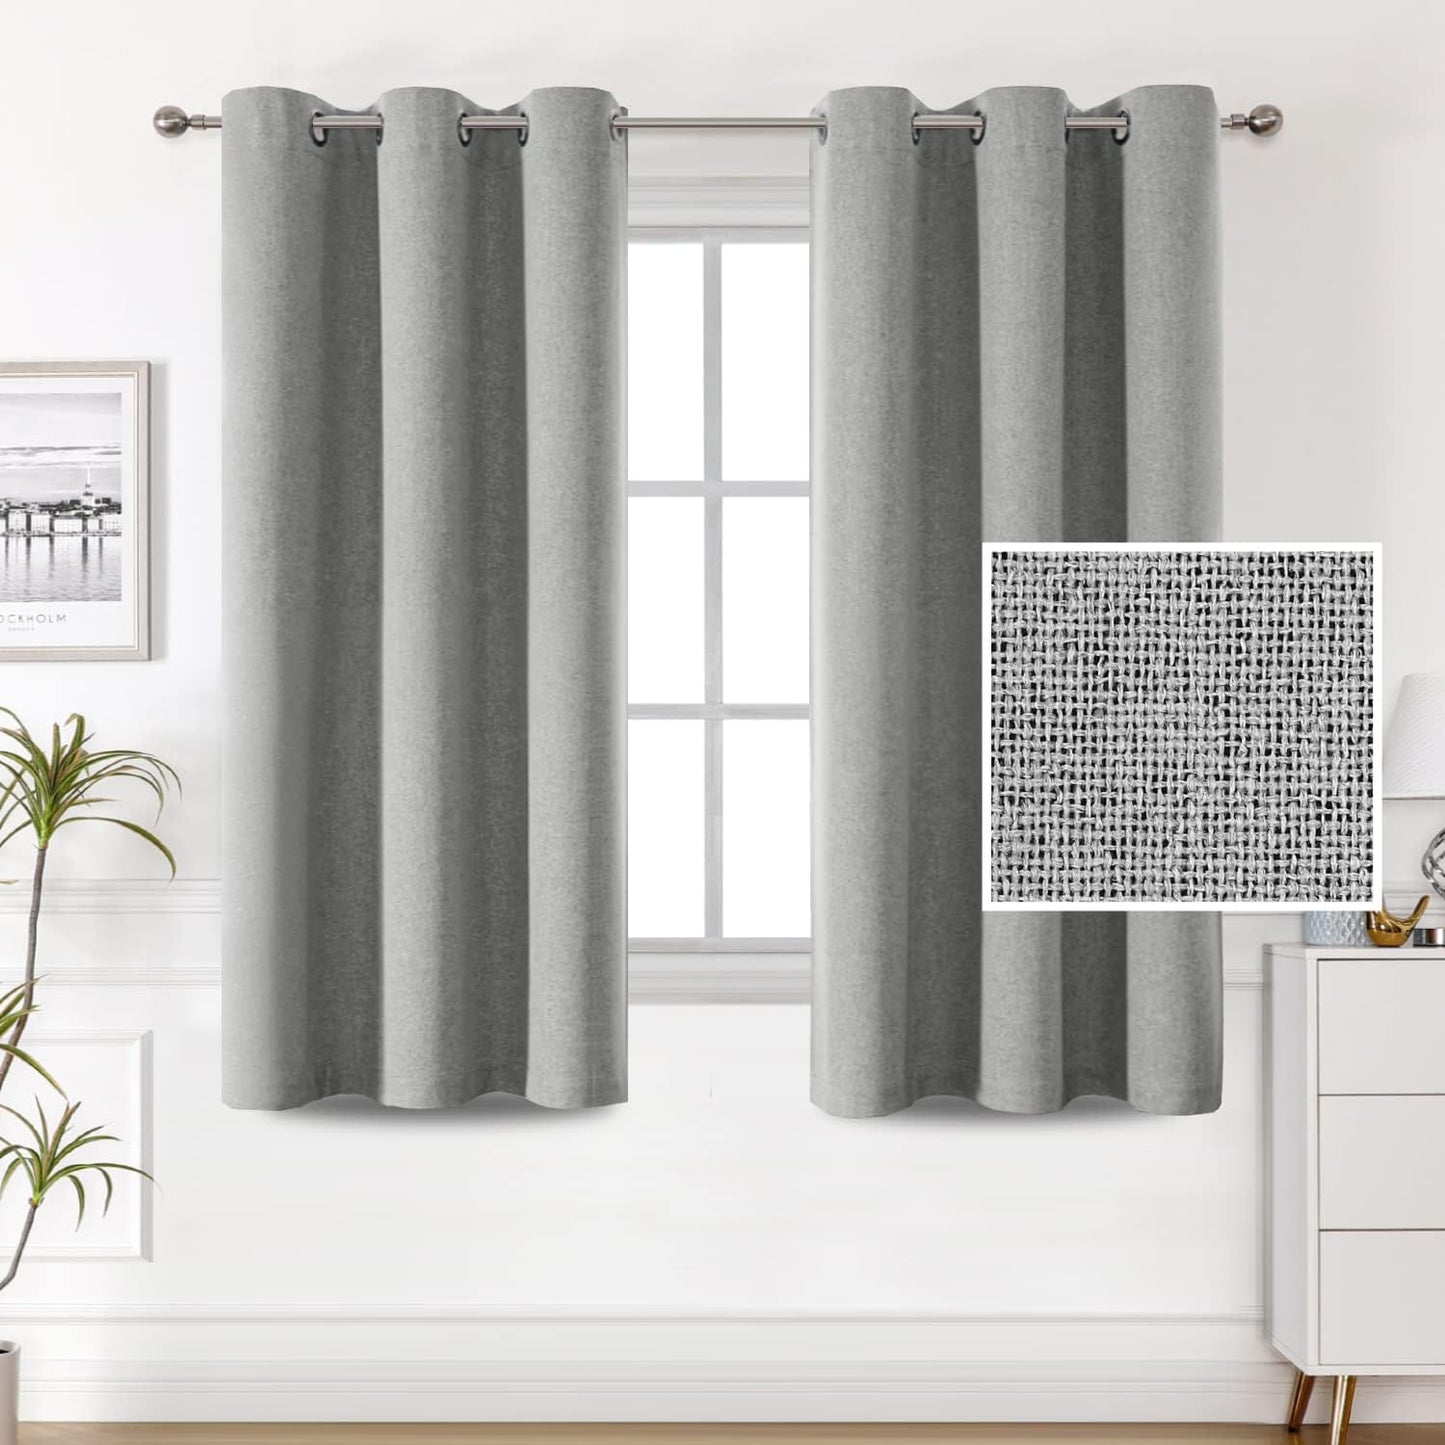 H.VERSAILTEX 100% Blackout Linen Look Curtains Thermal Insulated Curtains for Living Room Textured Burlap Drapes for Bedroom Grommet Linen Noise Blocking Curtains 42 X 84 Inch, 2 Panels - Sage  H.VERSAILTEX Grey 42"W X 63"L 